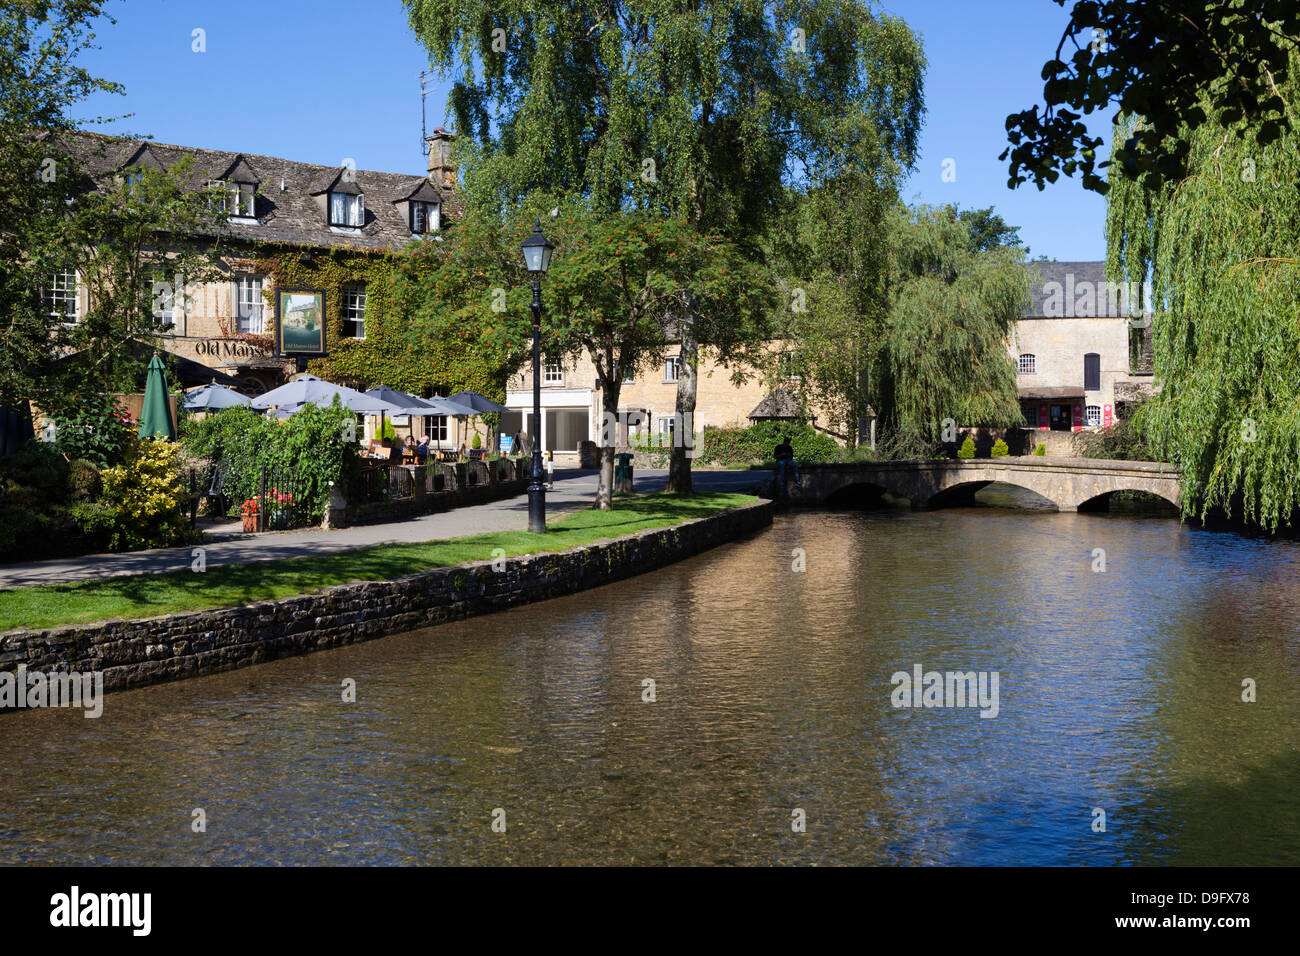 Blick entlang des River Windrush, Bourton-on-the-Water, Gloucestershire, Cotswolds, England, UK Stockfoto